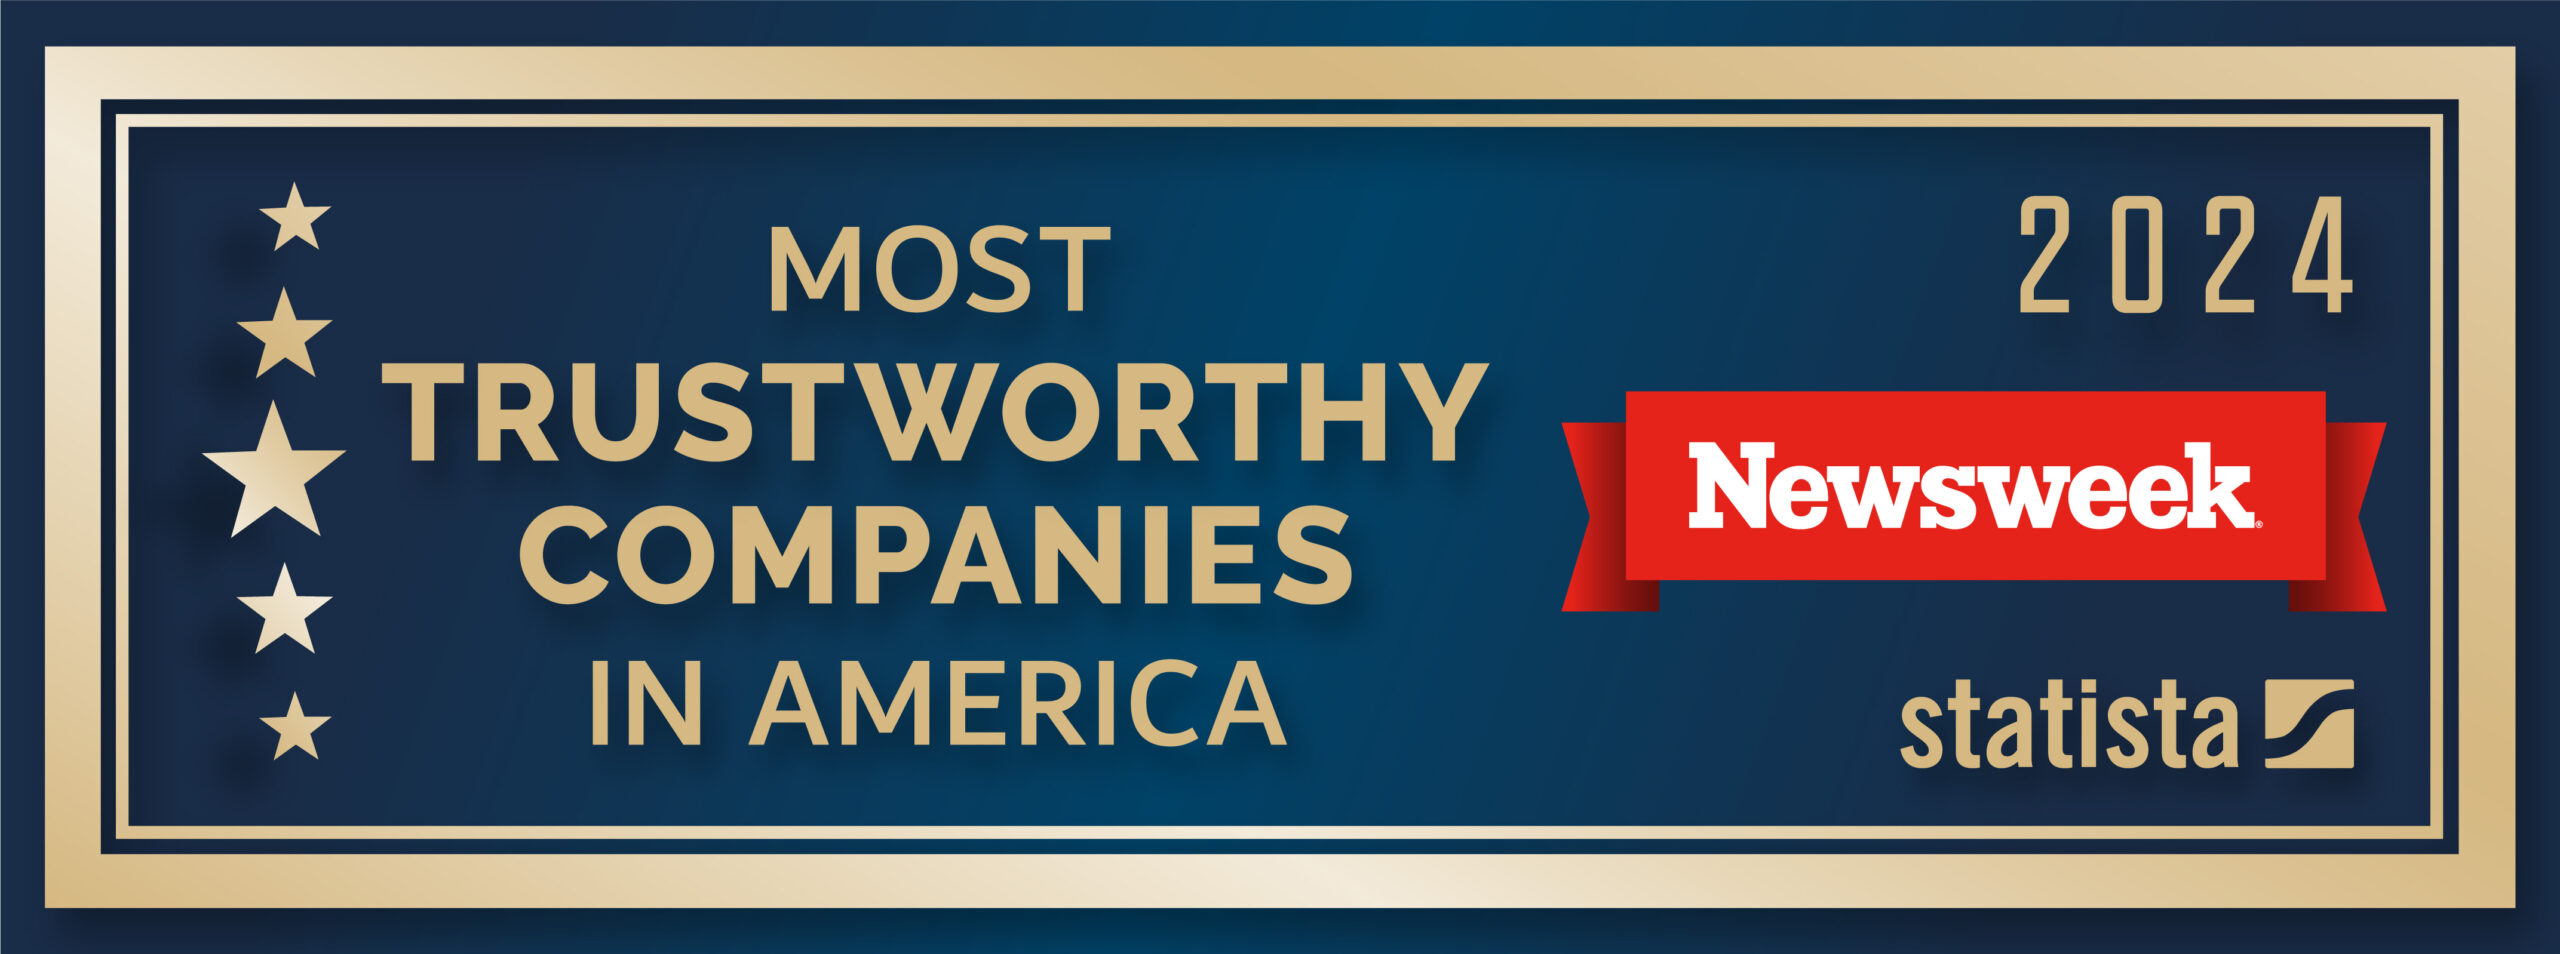 Johnson Brothers Honored as Most Trustworthy Company in America for Second Consecutive Year by Newsweek